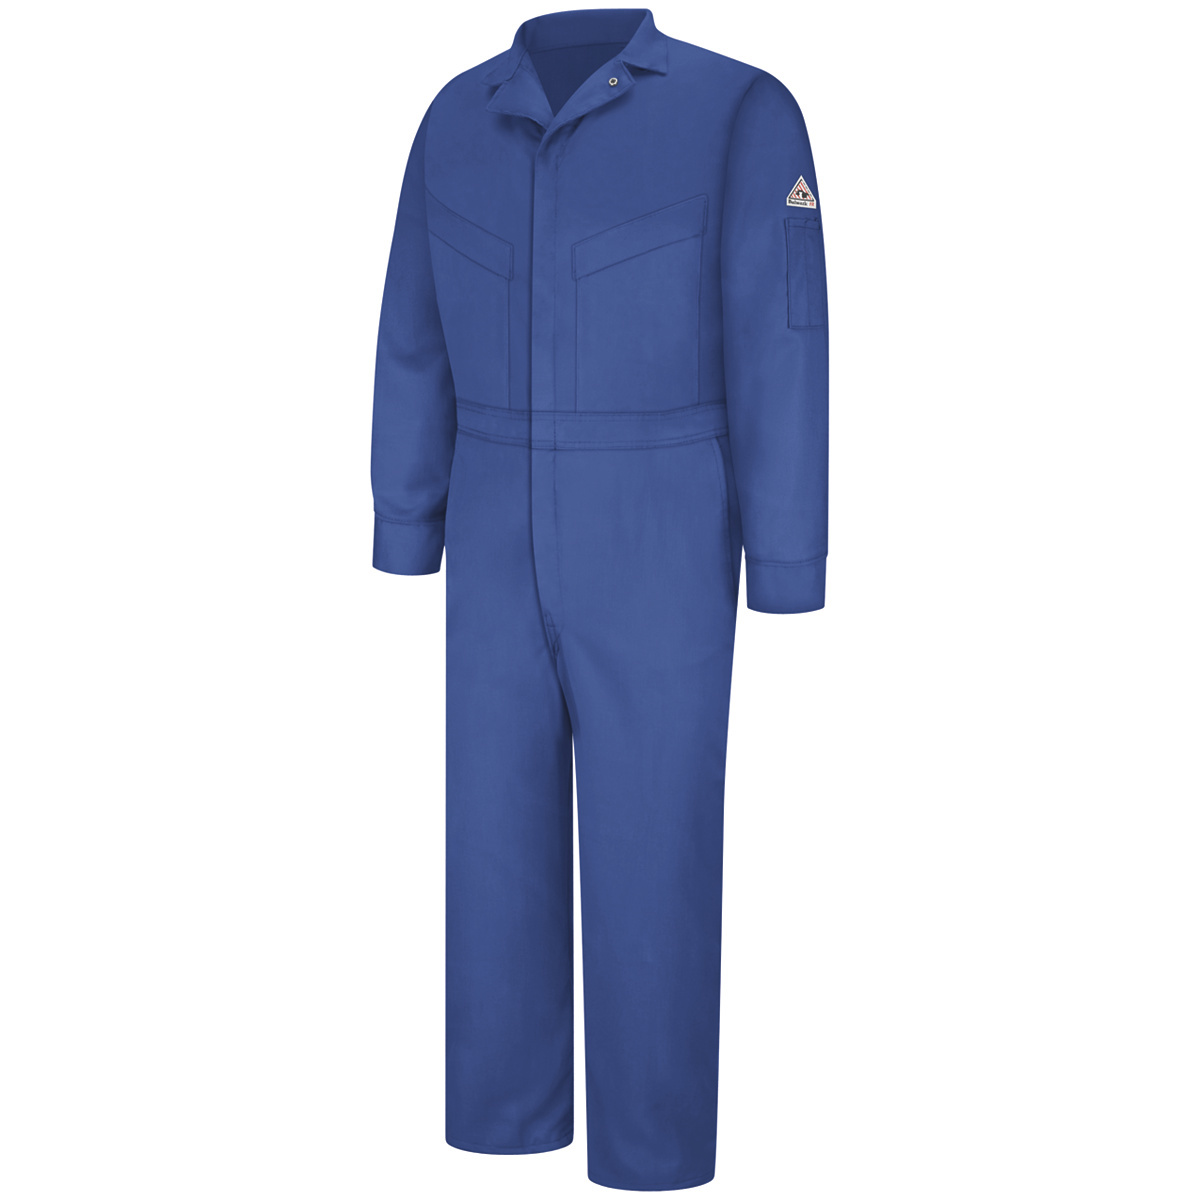 Bulwark® 50 Tall Royal Blue EXCEL FR® ComforTouch® Sateen/Cotton/Nylon Water Repellent Flame Resistant Coveralls With Zipper Fro